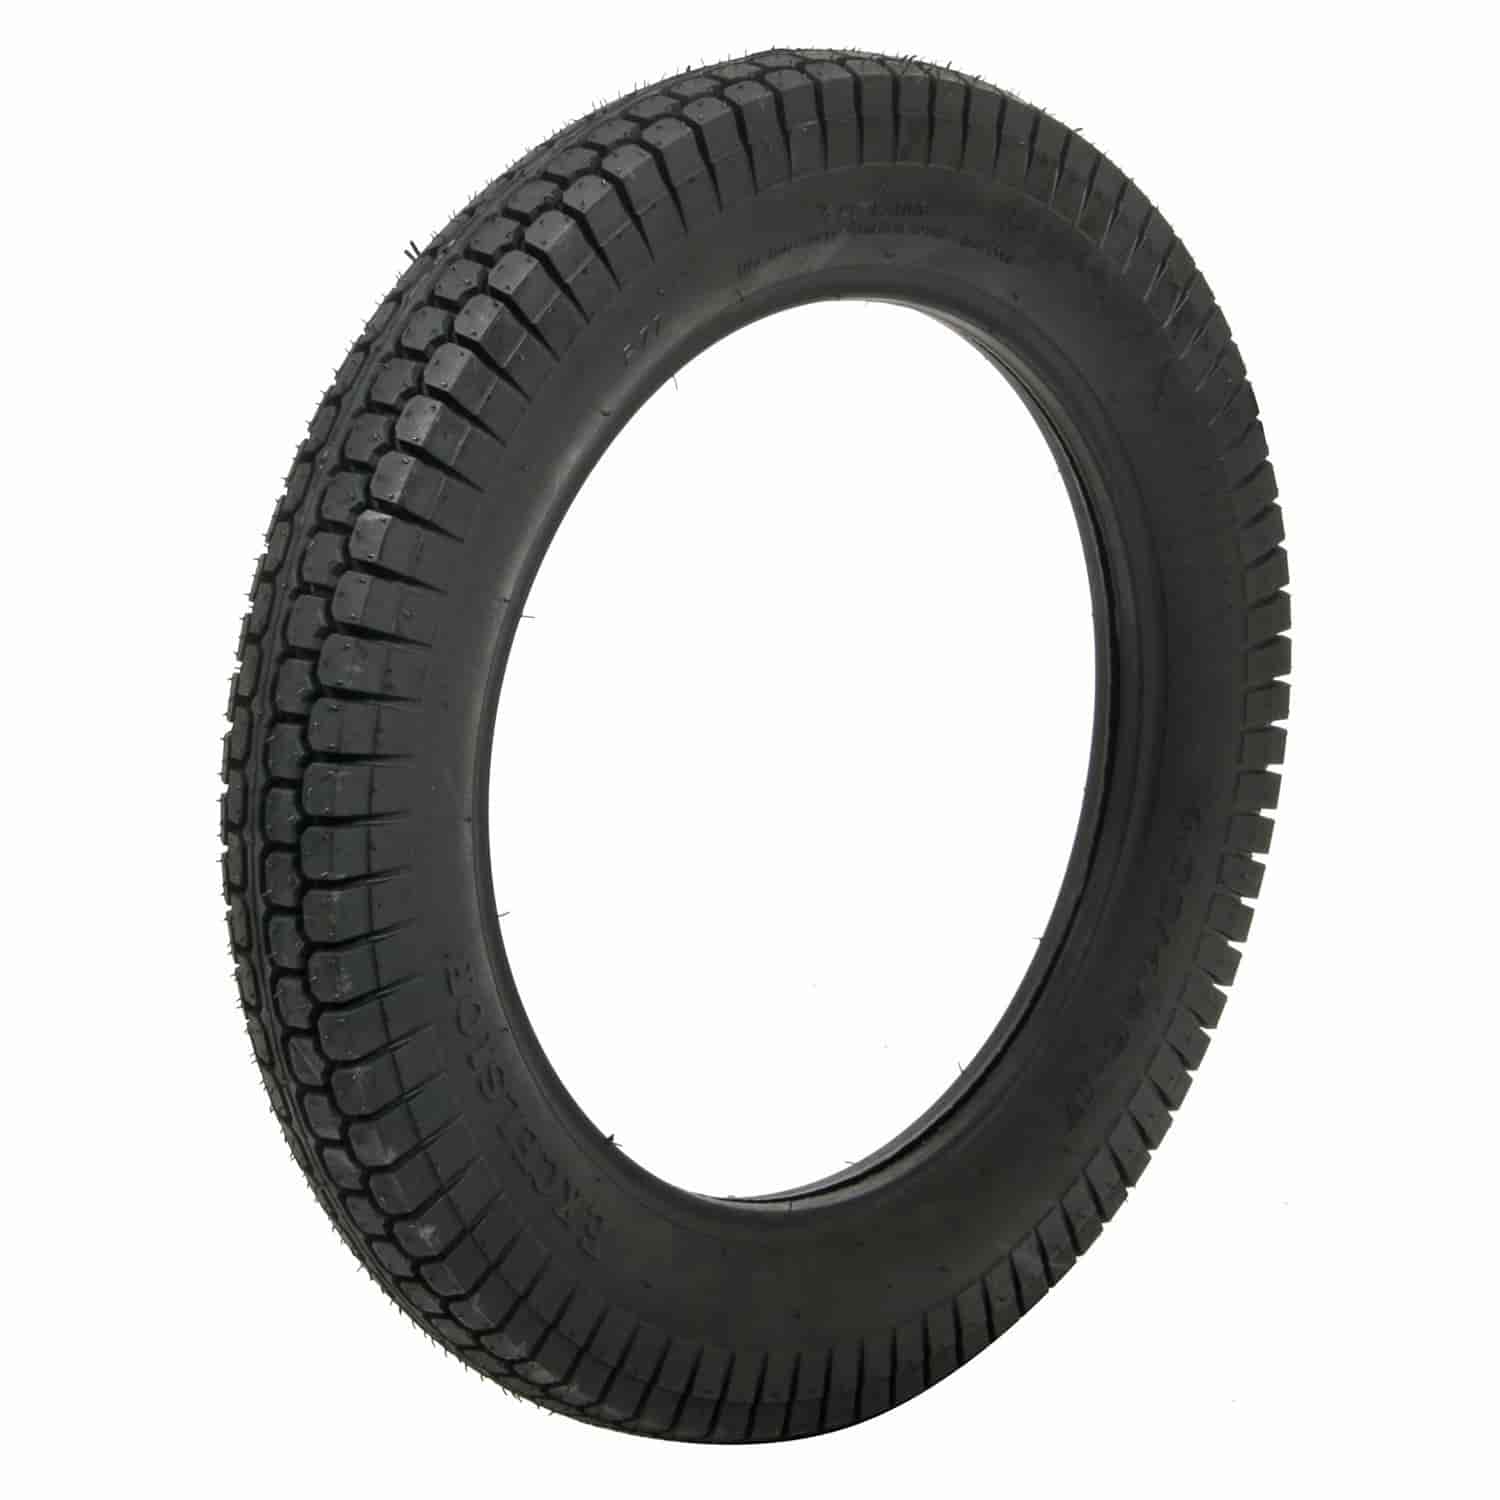 Excelsior Bias Ply Tire 400/425-17 [Blackwall]